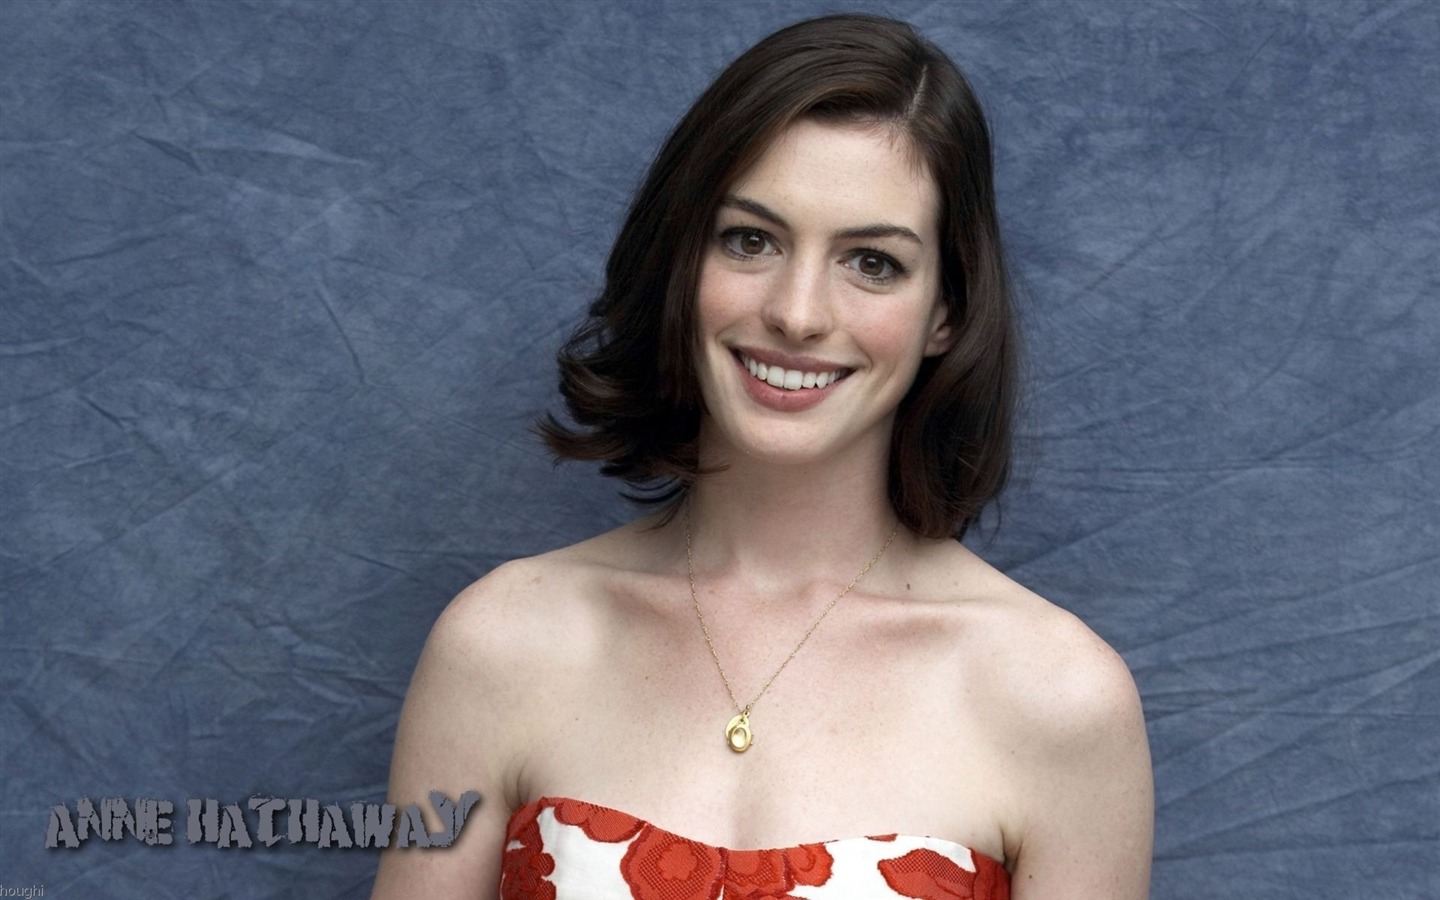 Anne Hathaway #035 - 1440x900 Wallpapers Pictures Photos Images